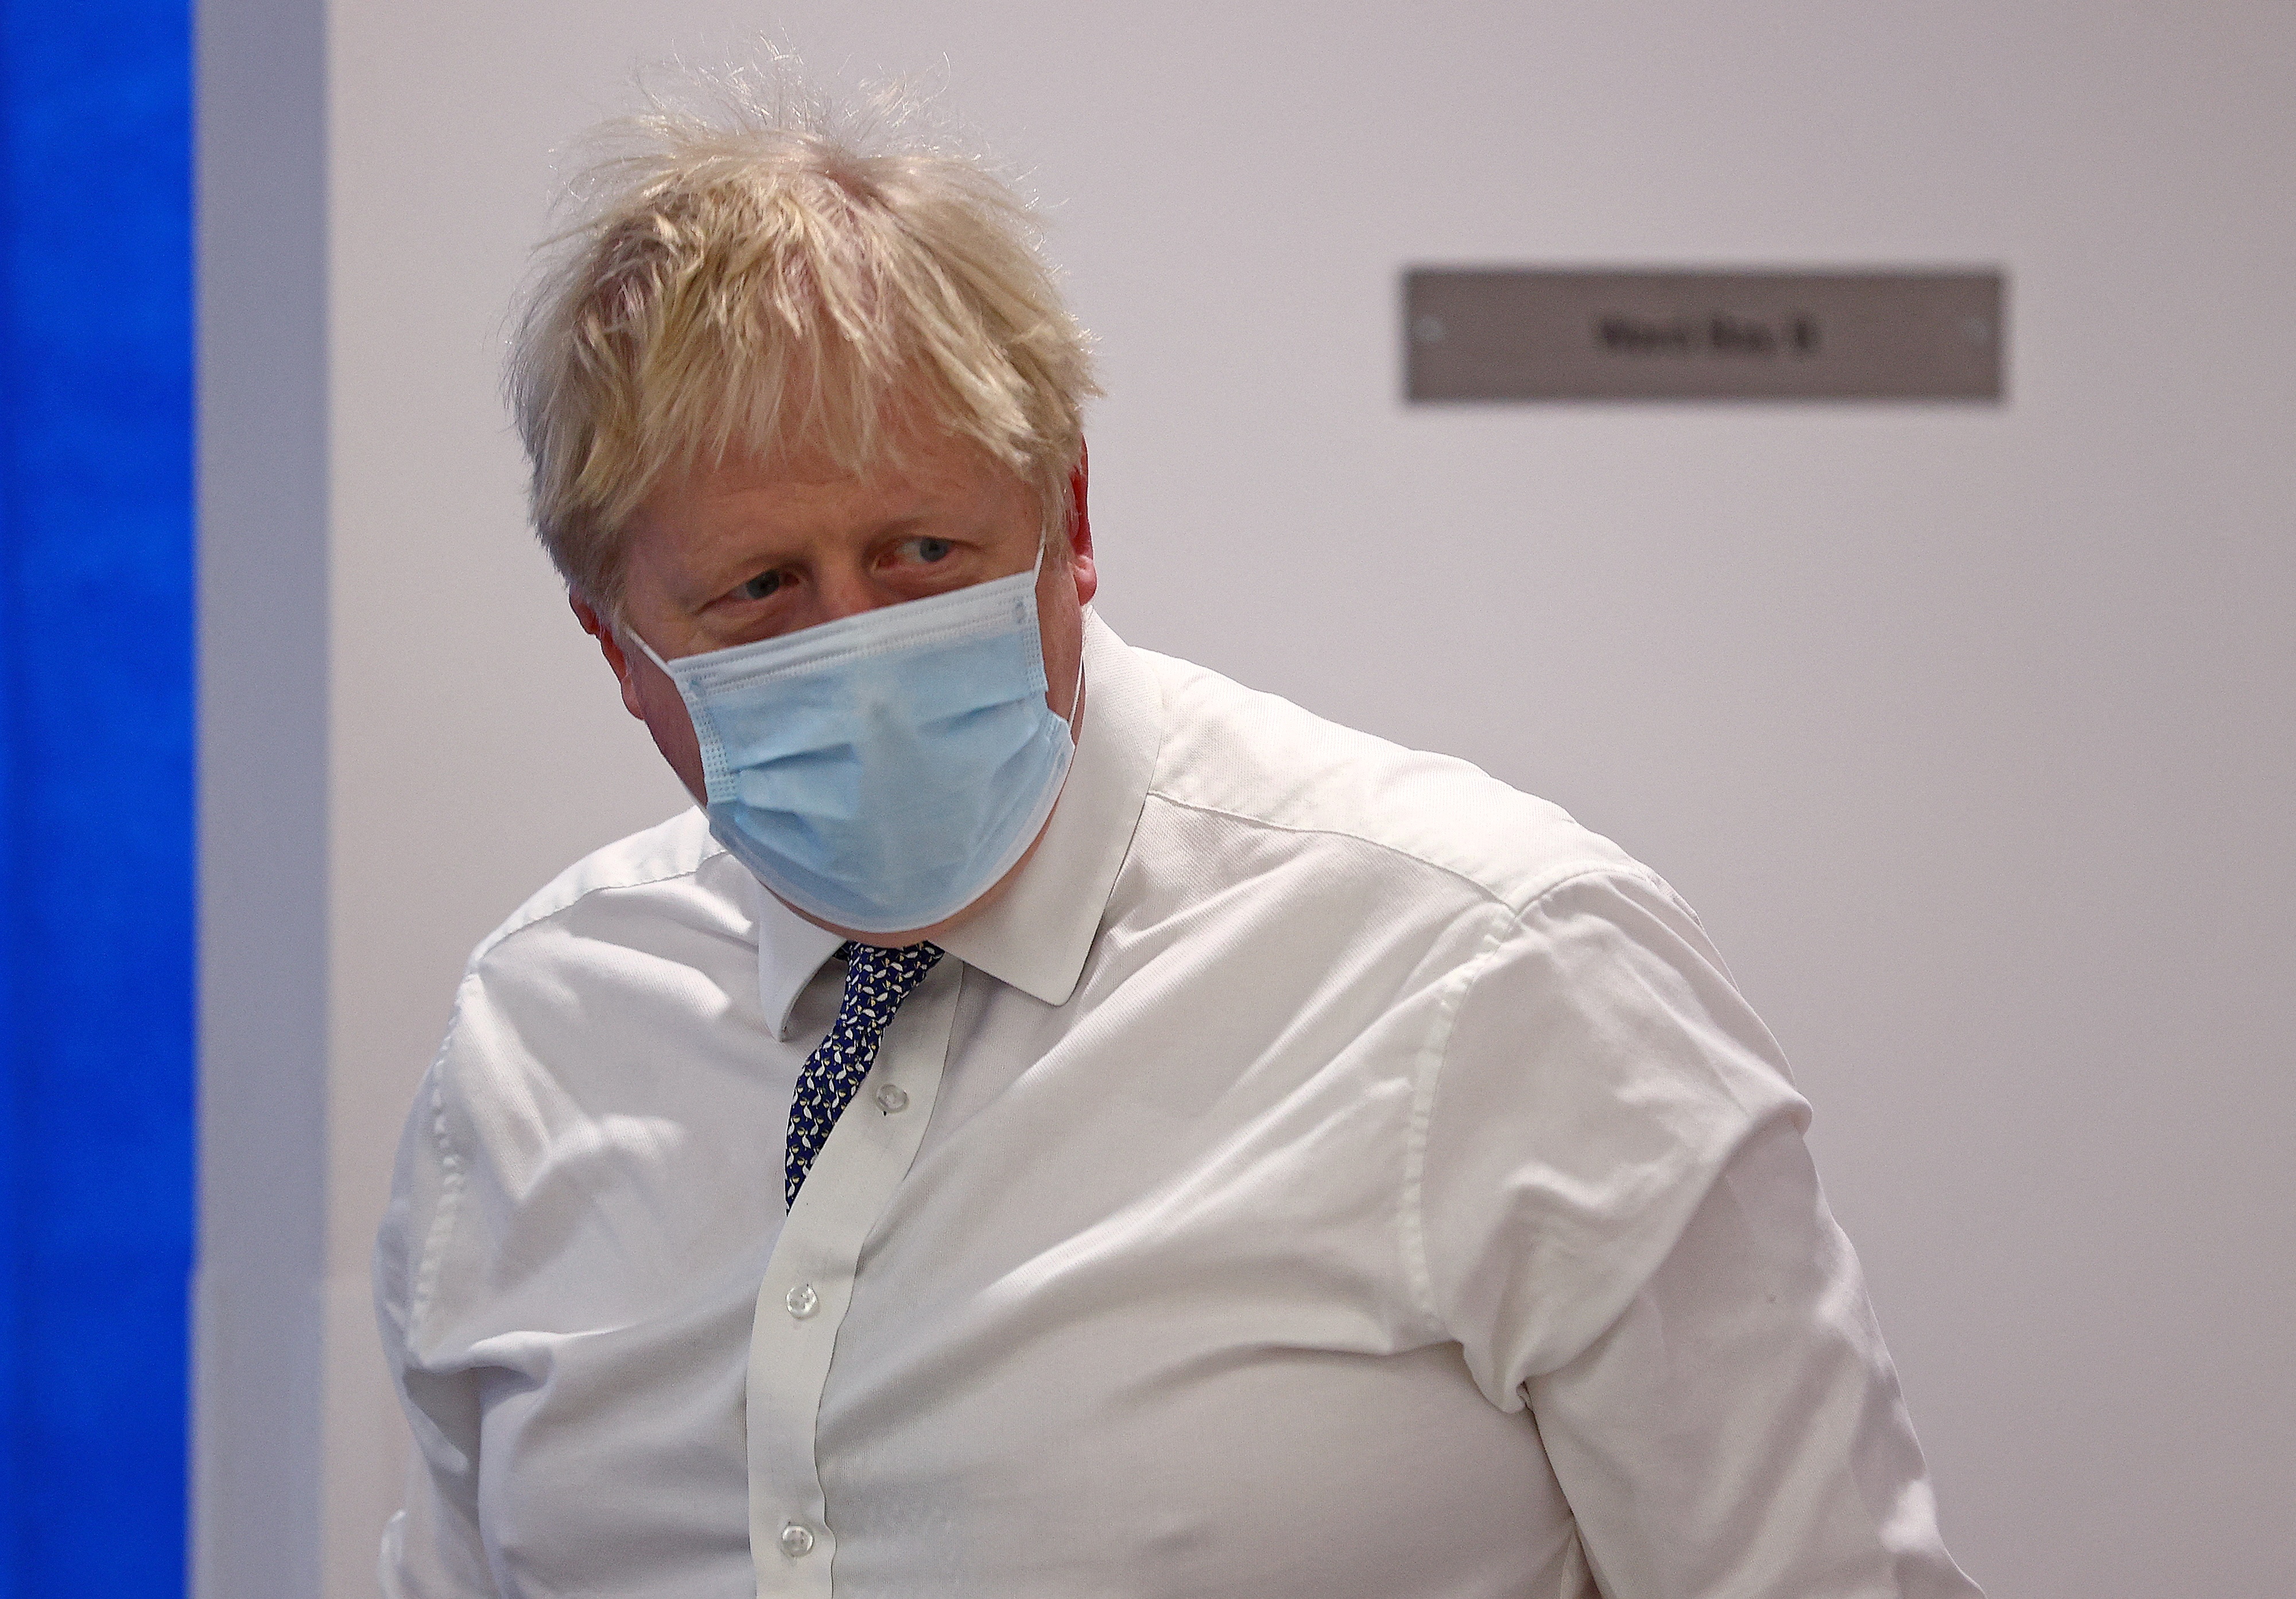 Britain's Prime Minister Boris Johnson wearing a face covering to help mitigate the spread of Covid-19, reacts during his visit to Milton Keynes University Hospital, north of London, Britain January 24, 2022. Adrian Dennis/Pool via REUTERS